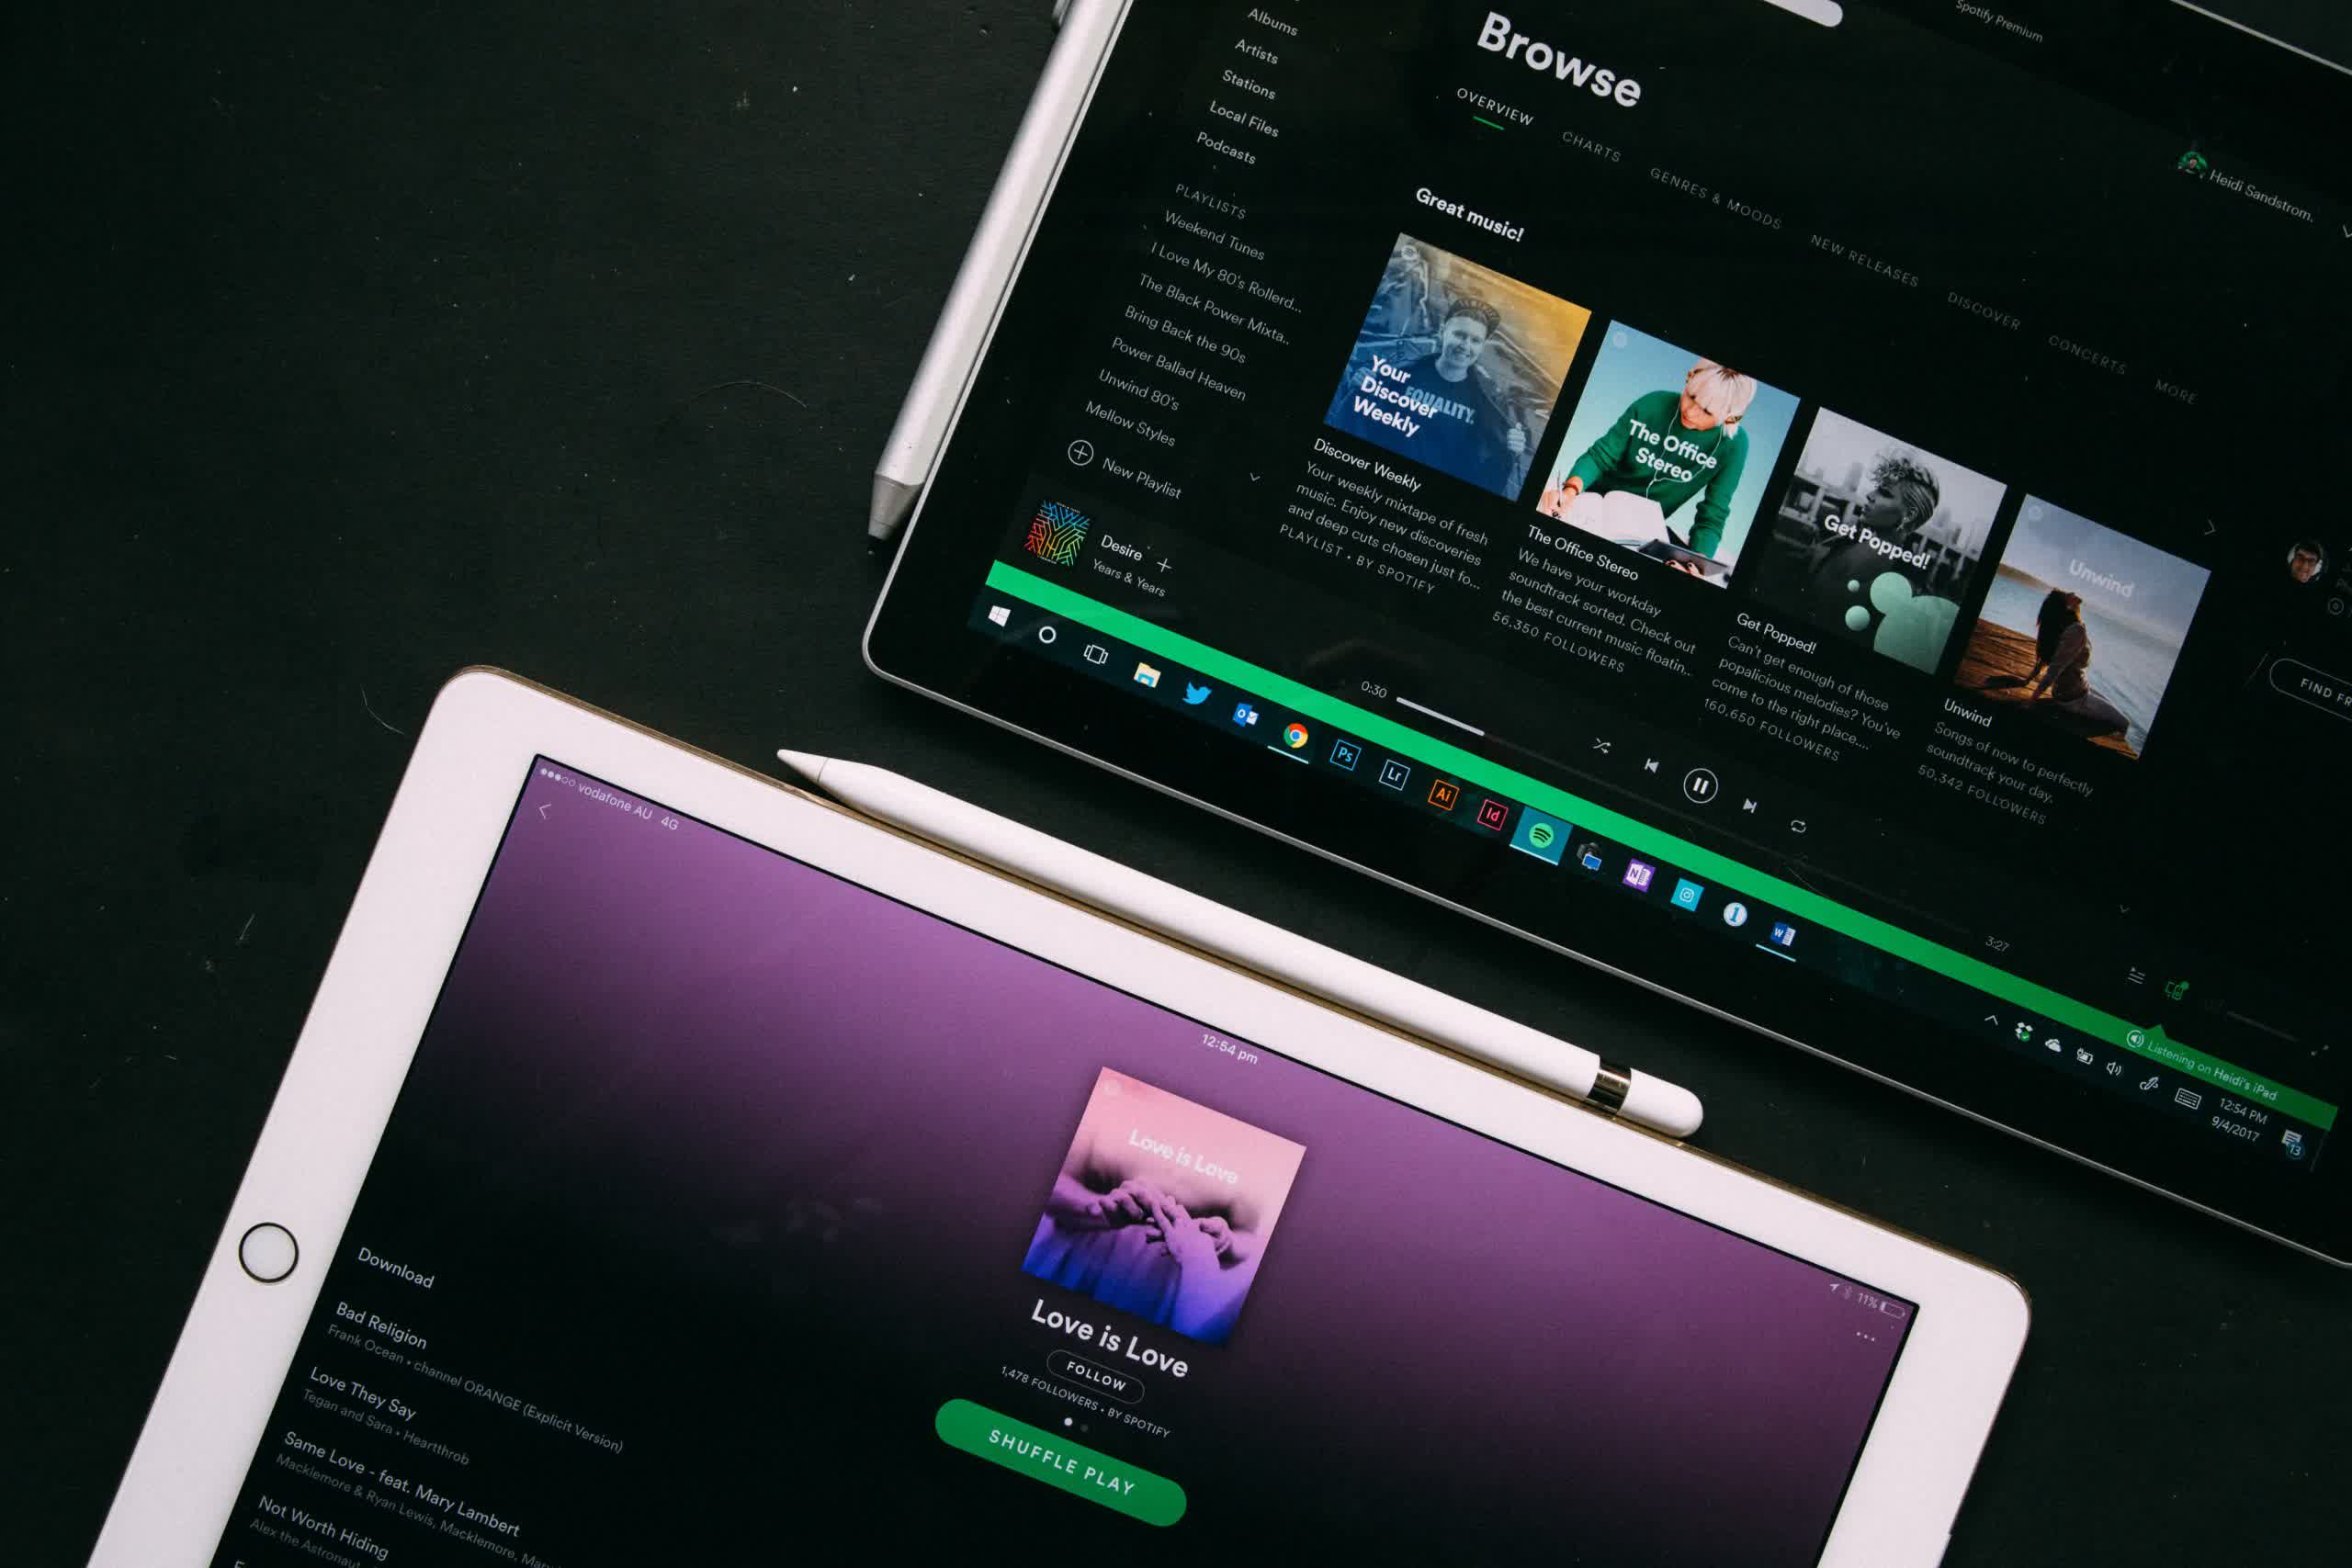 Spotify gained 2 million subscribers this year despite Joe Rogan controversy and Russia exit